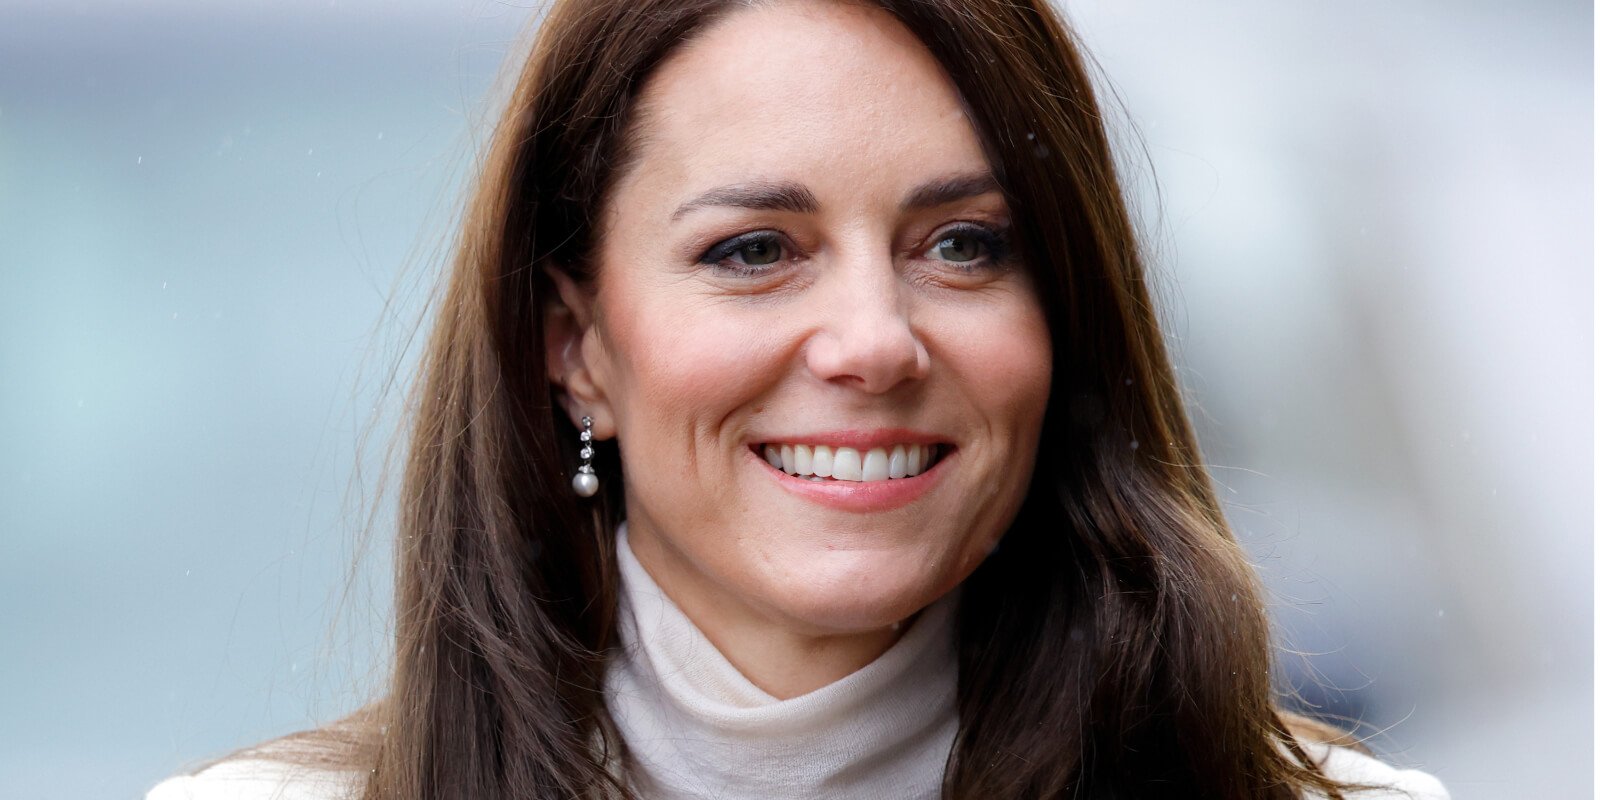 Kate Middleton is photographed during a 2023 visit to Wales, where she is known as Princess of Wales.